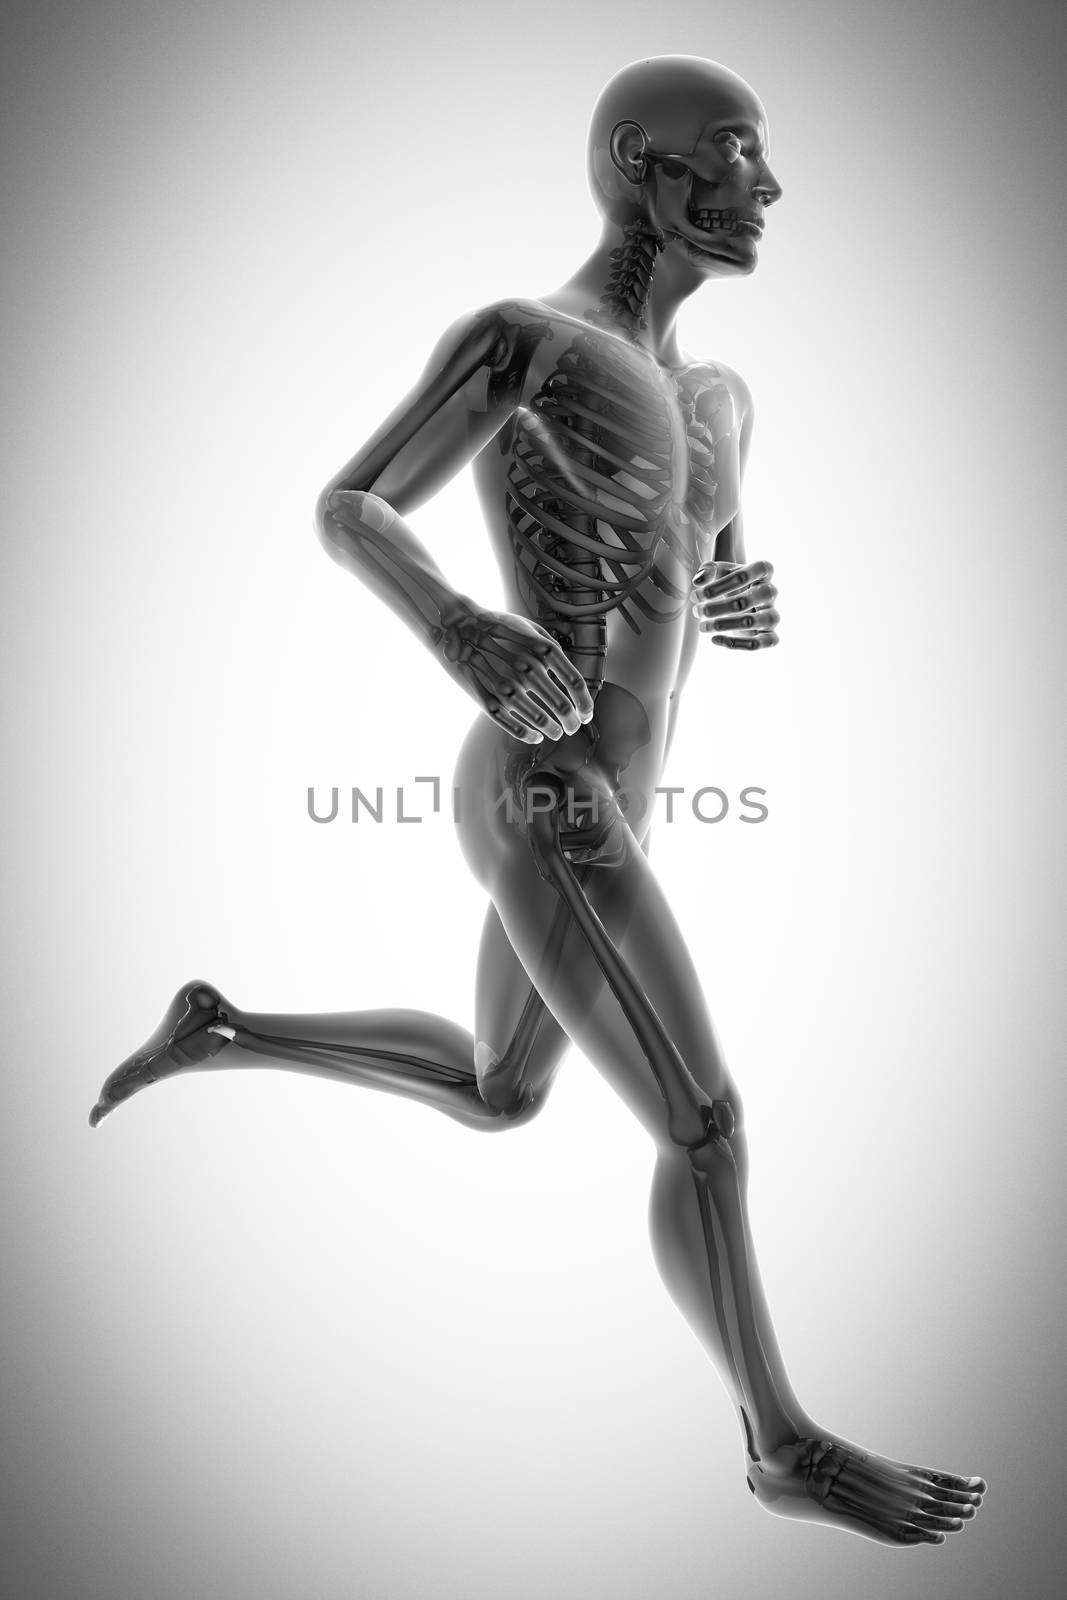 human bones radiography scan image by videodoctor